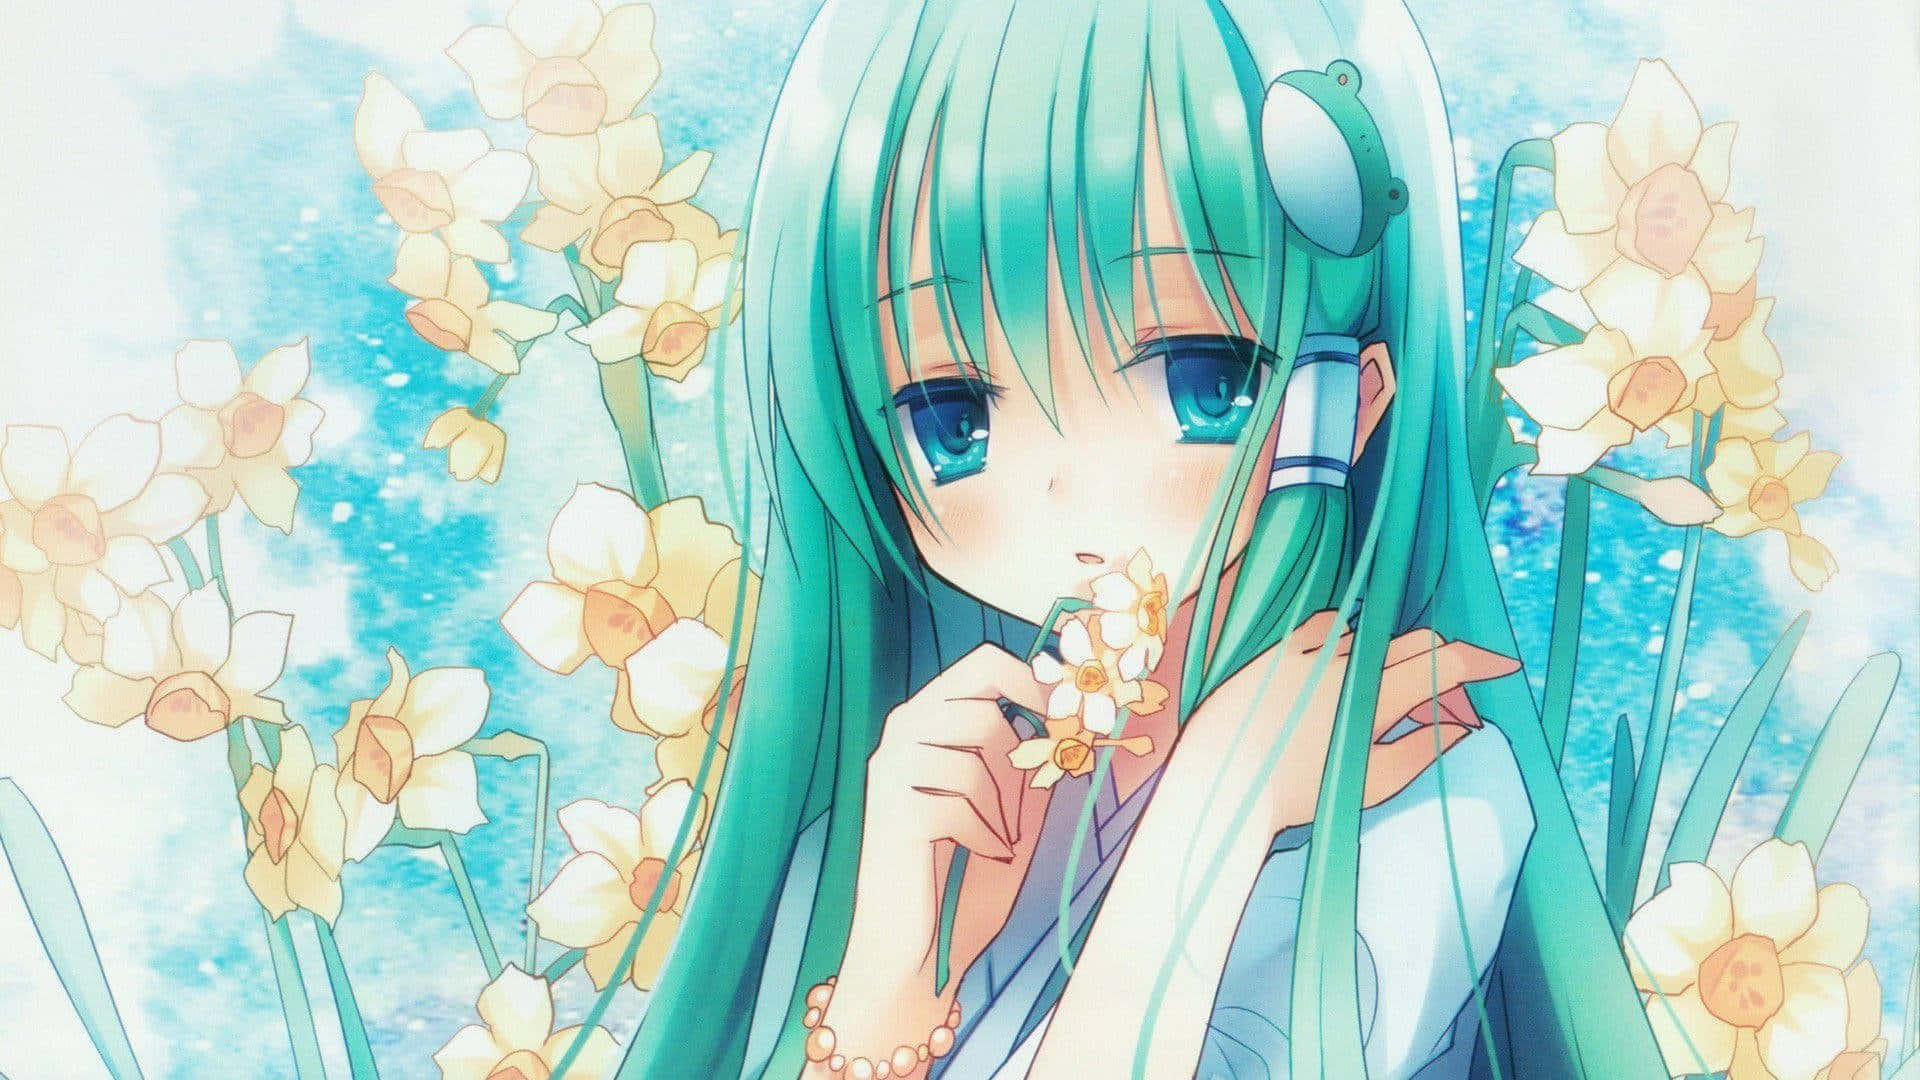 Anime Girl With Blue Hair And Flowers Wallpaper